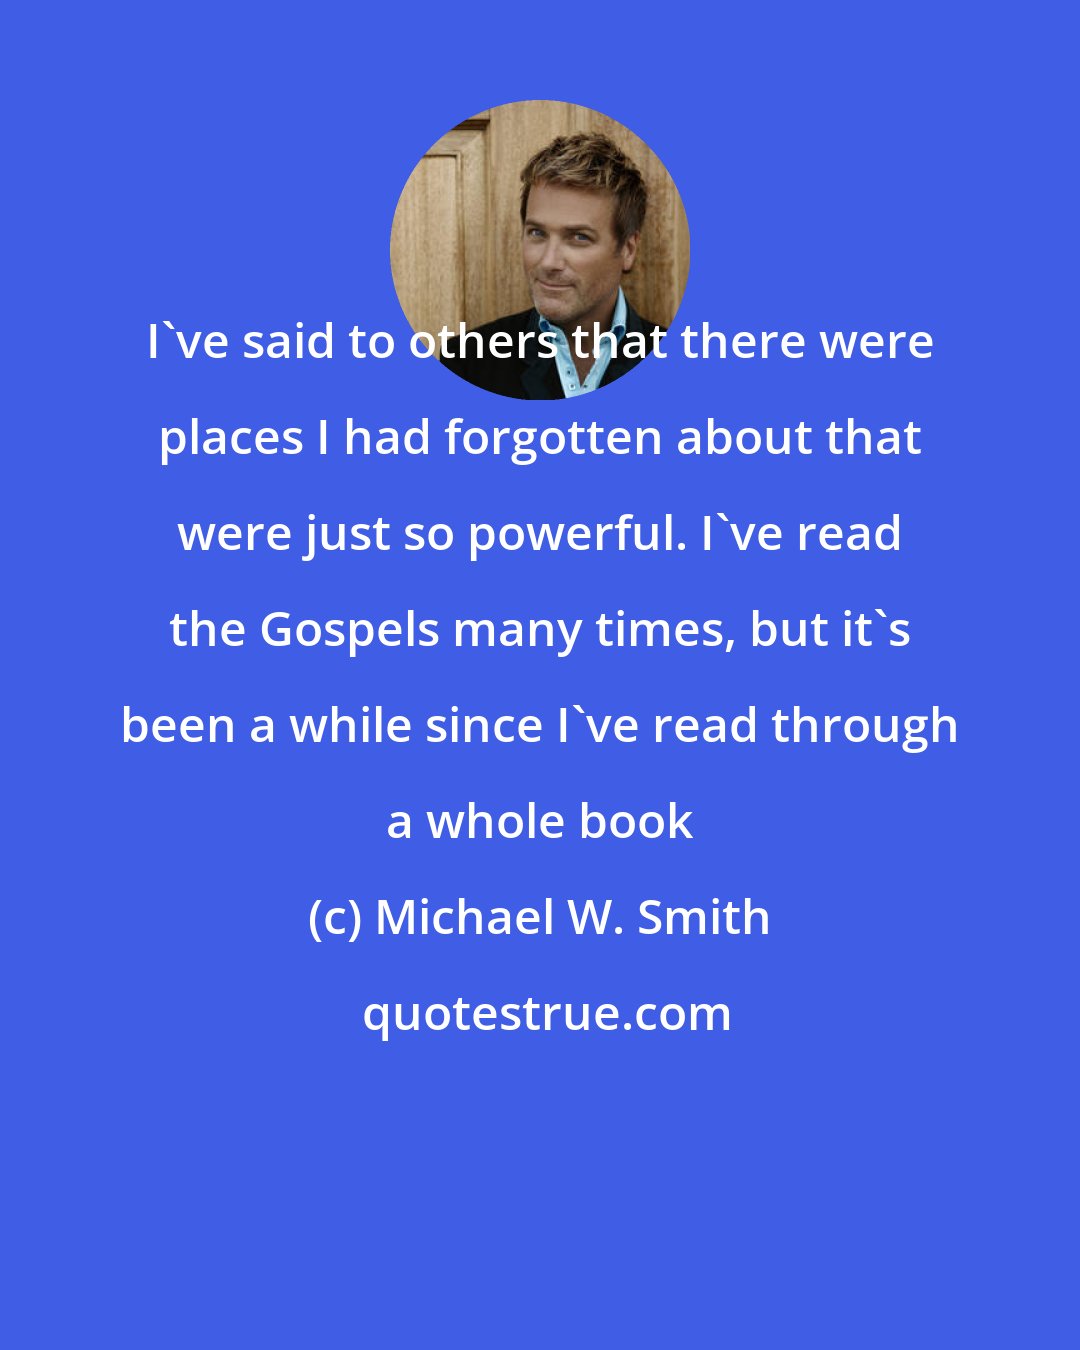 Michael W. Smith: I've said to others that there were places I had forgotten about that were just so powerful. I've read the Gospels many times, but it's been a while since I've read through a whole book